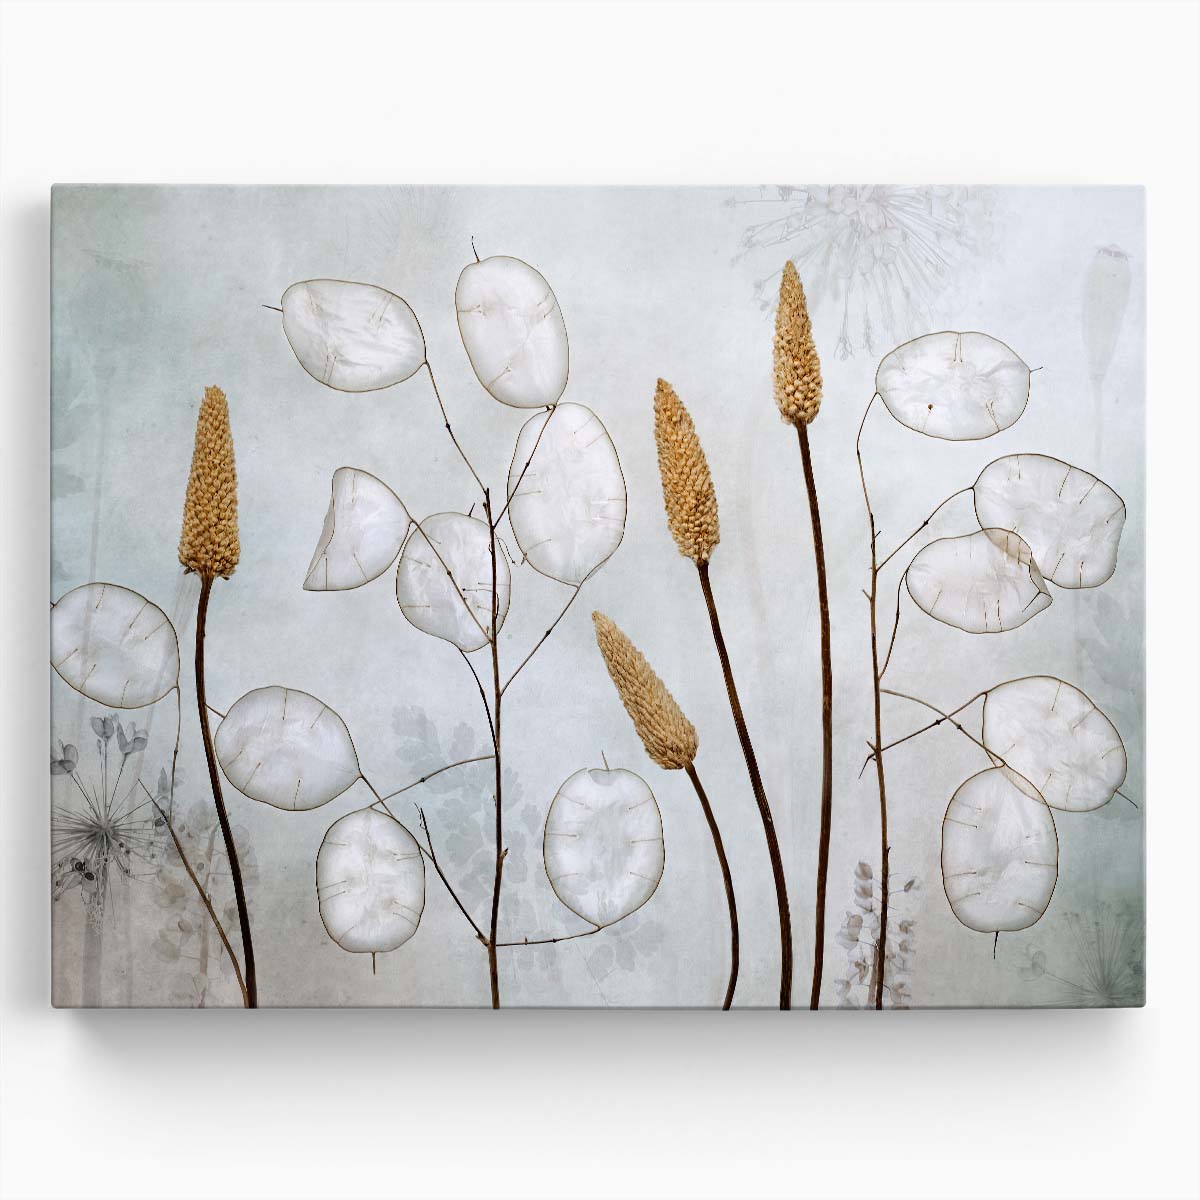 Autumn Lunaria Floral Macro Photography by Mandy Disher Wall Art by Luxuriance Designs. Made in USA.